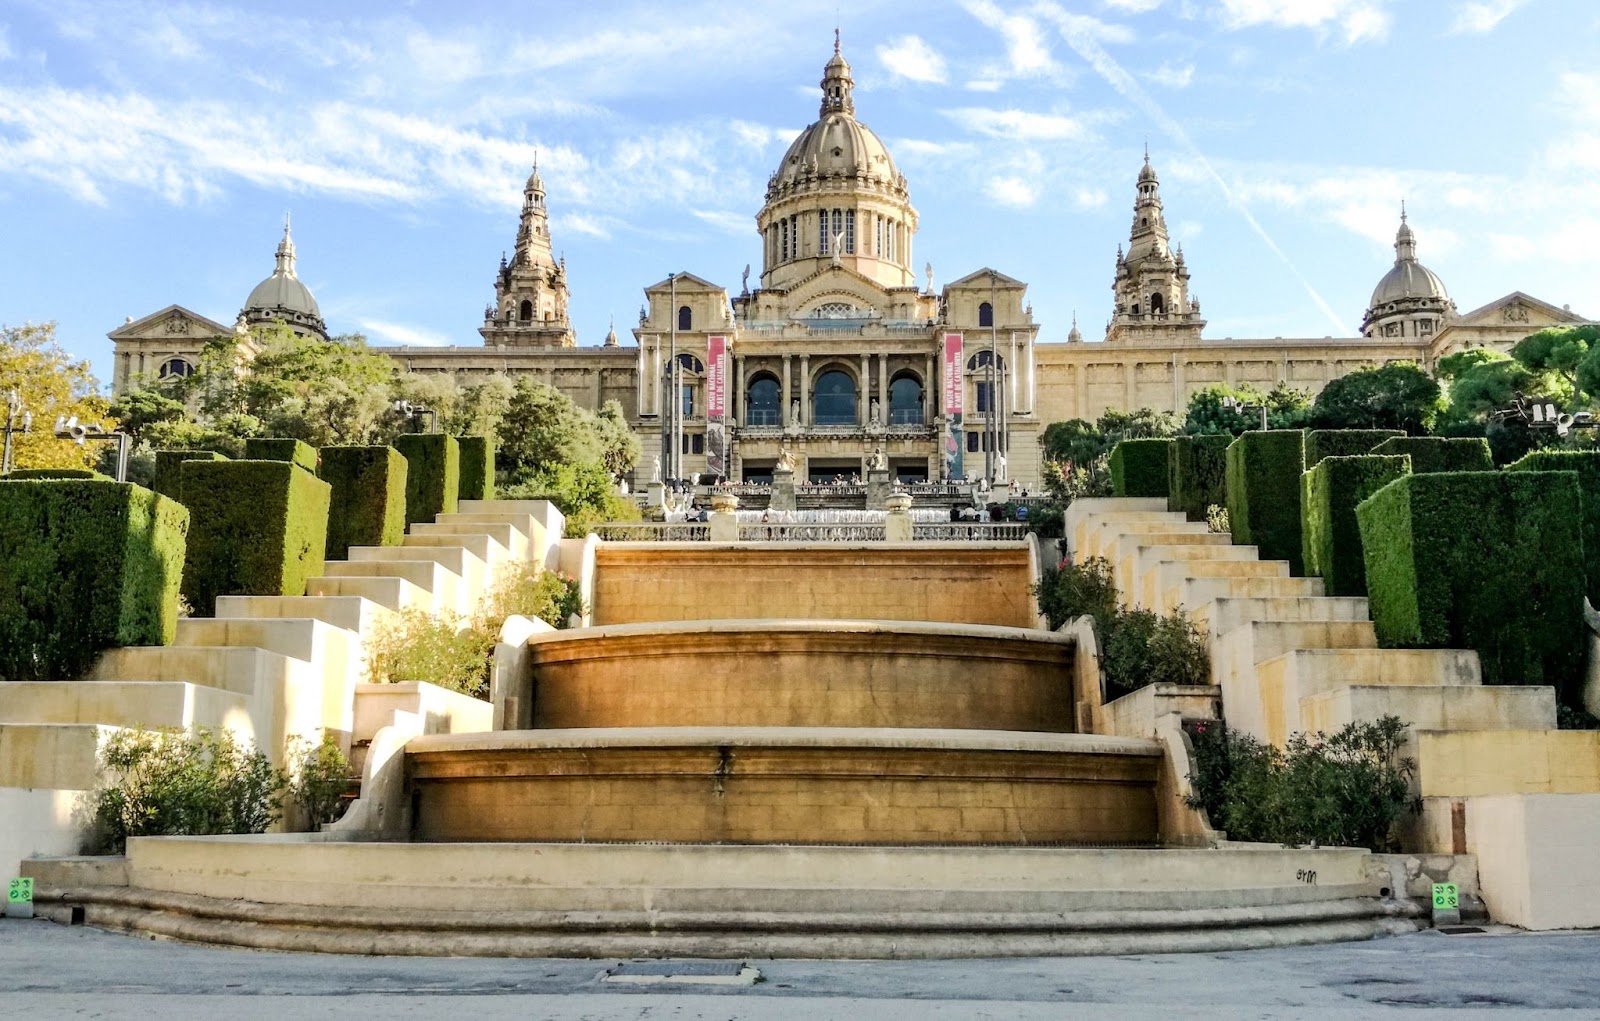 Barcelona Museum Welcomes Nudist Visitors for Statue Tour